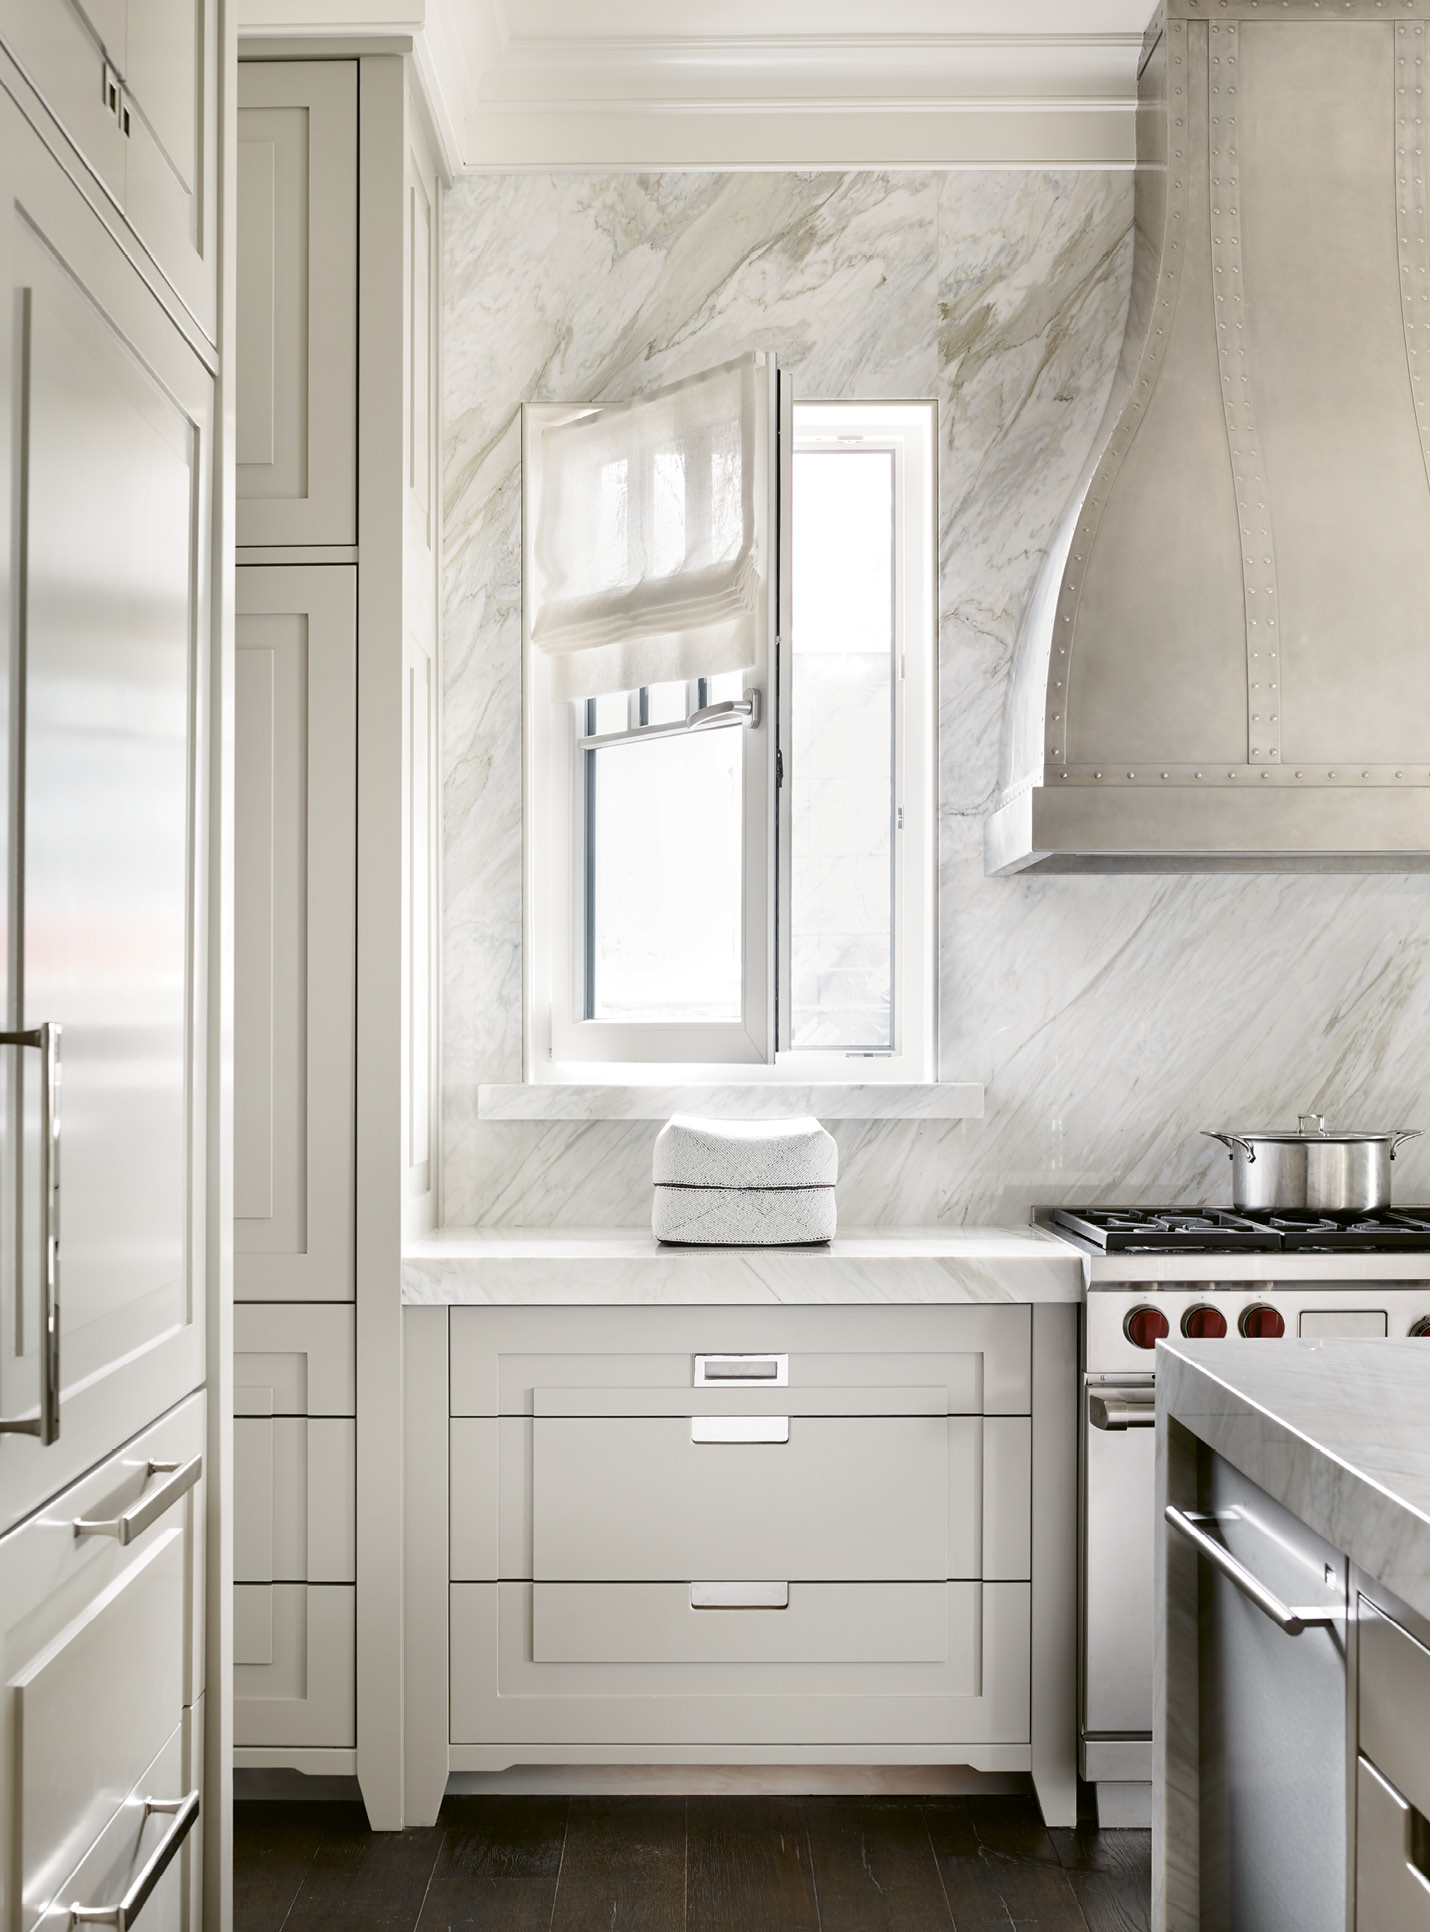 The kitchen walls wrapped in Calacatta Gold Extra marble